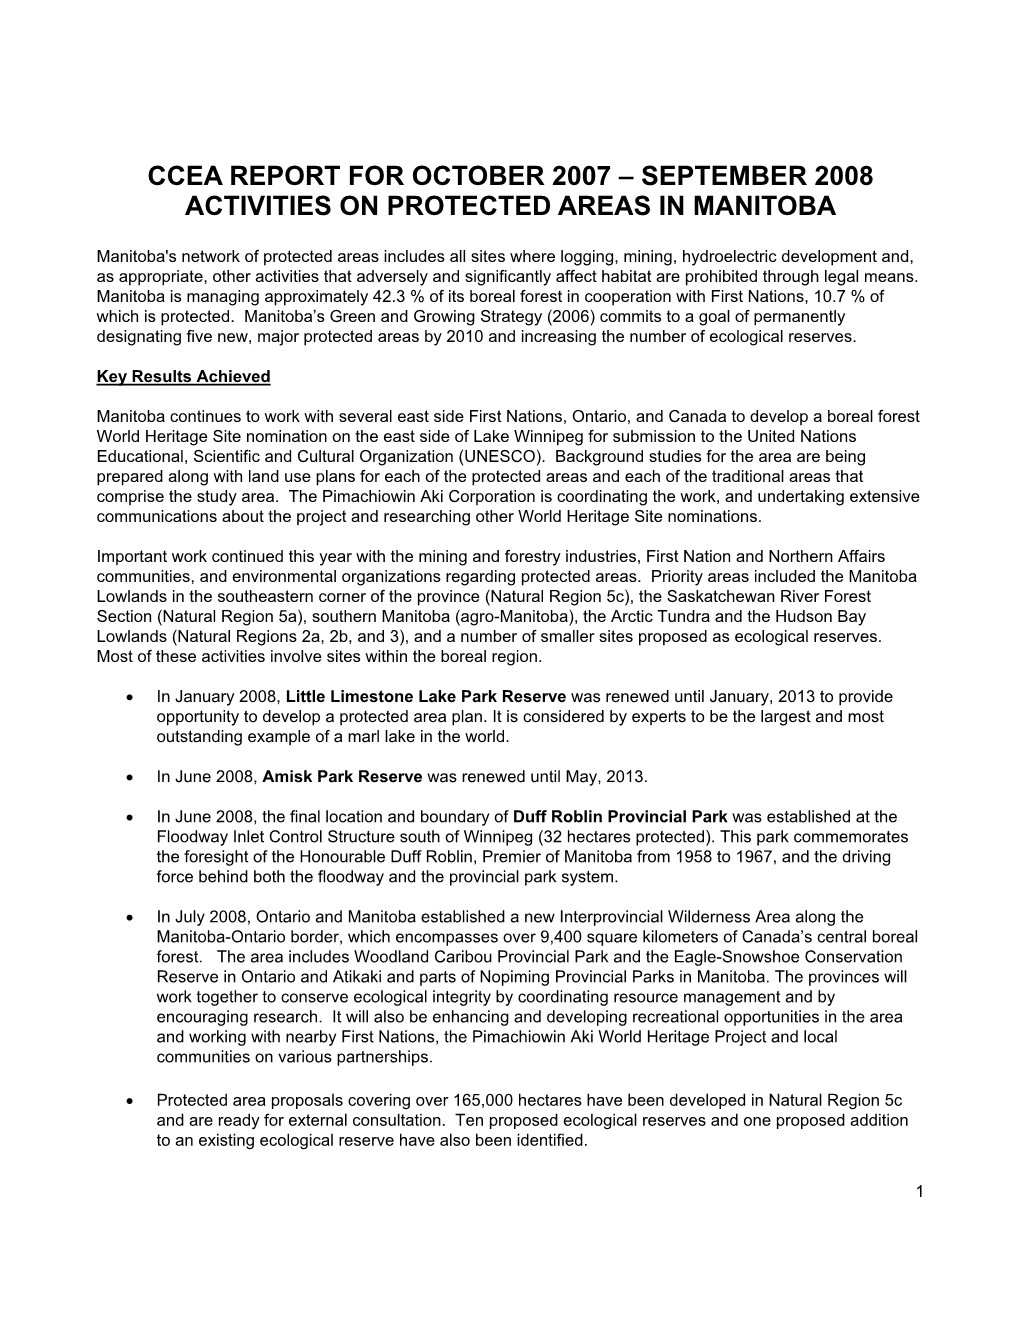 September 2008 Activities on Protected Areas in Manitoba